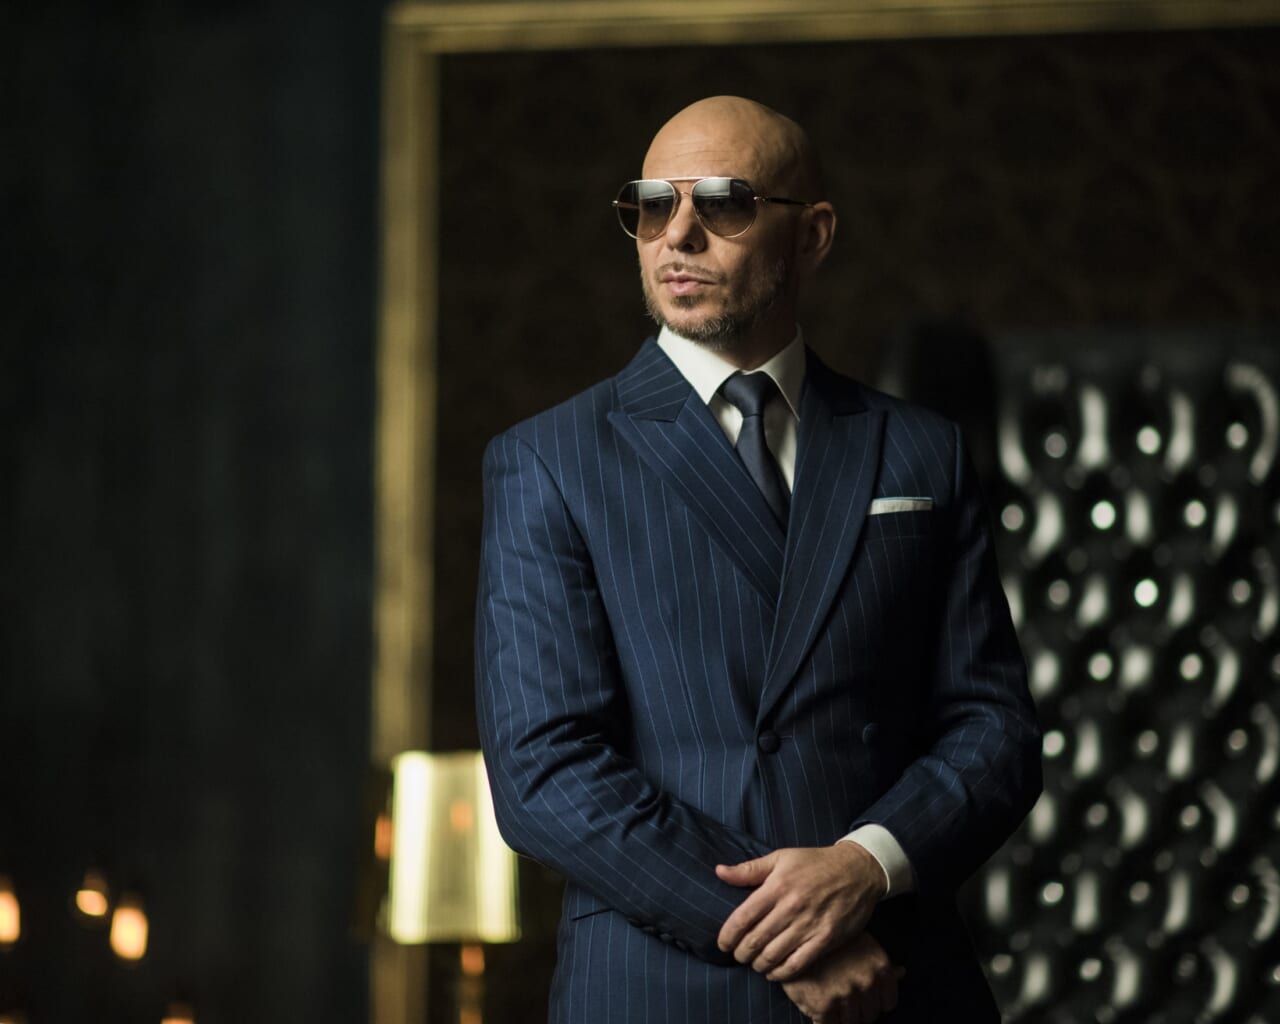 NASCAR: Pitbull joins Trackhouse Racing as co-owner